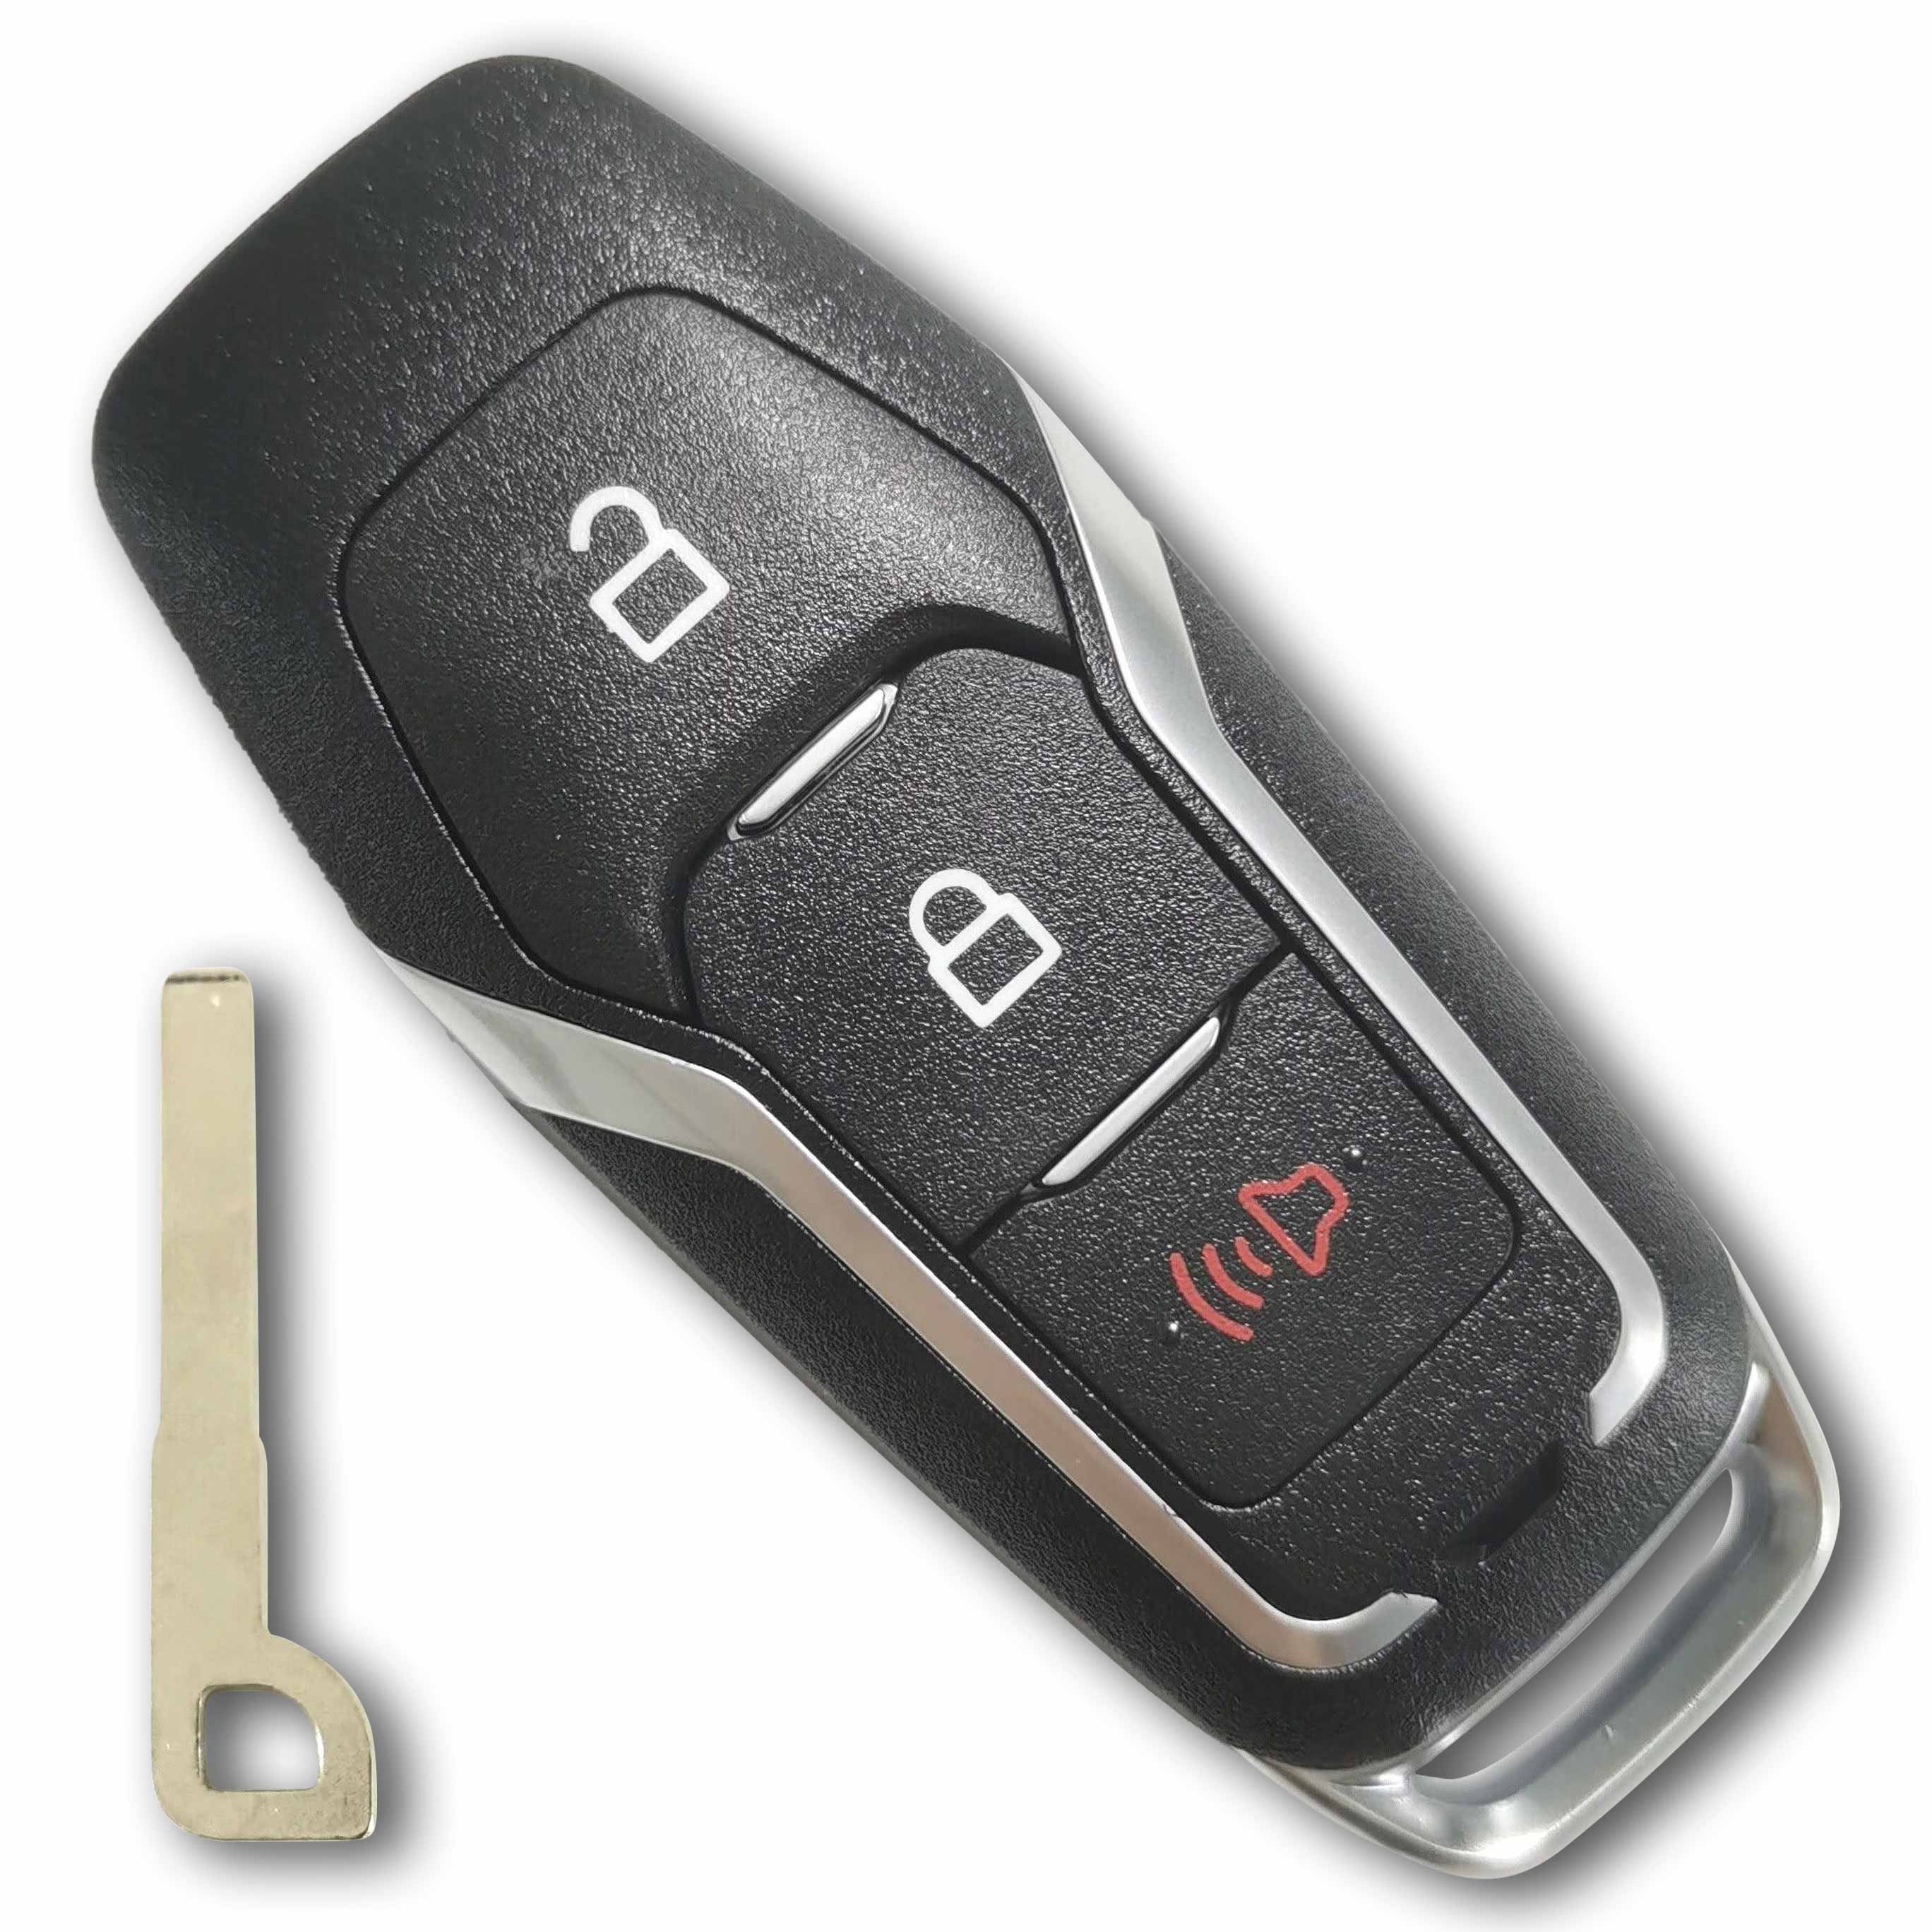 315 MHz Smart Key for 2016 Ford F150 Explorer / M3N-A2C31243800